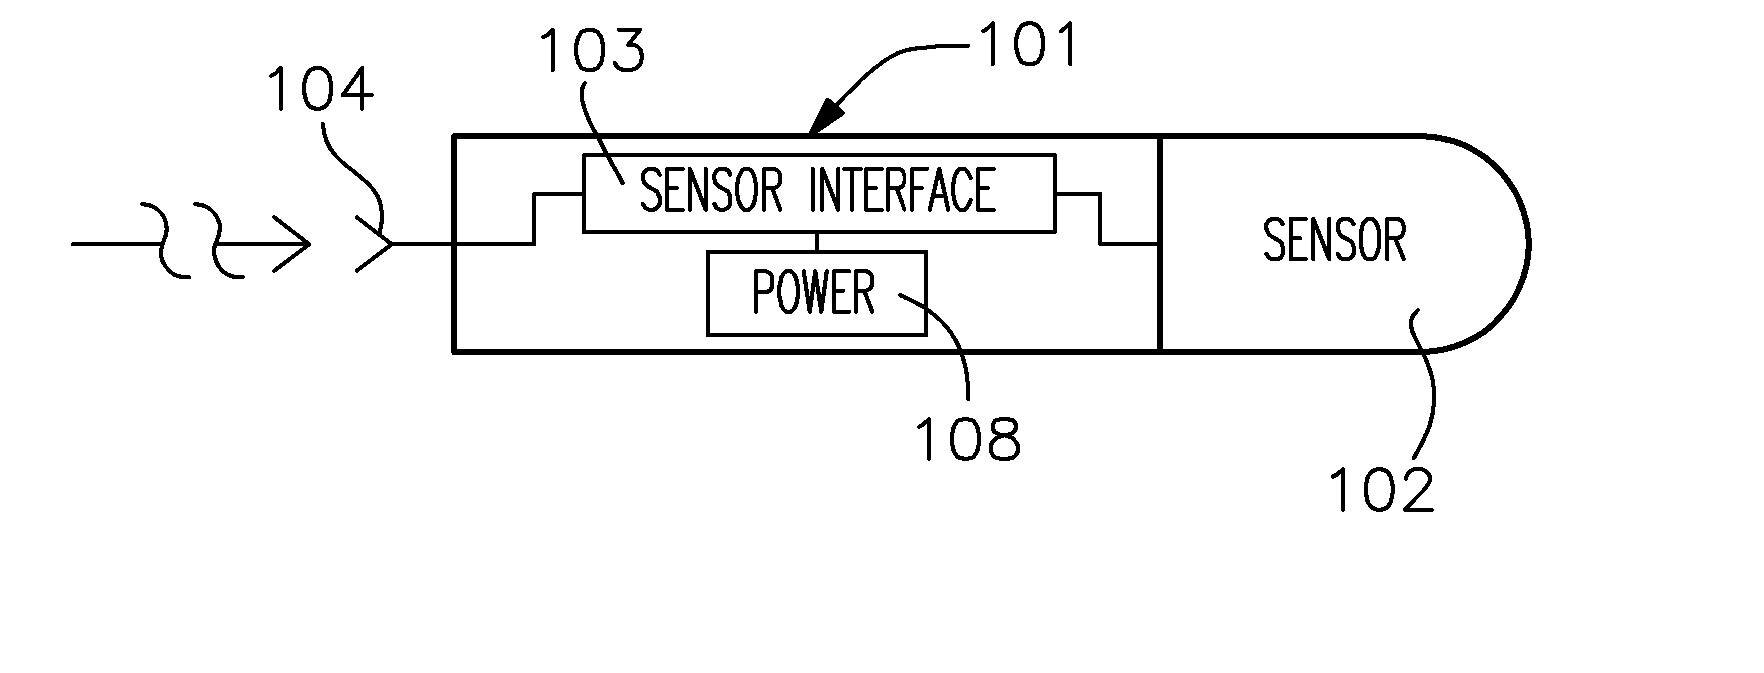 Freshness tracking and monitoring system and method